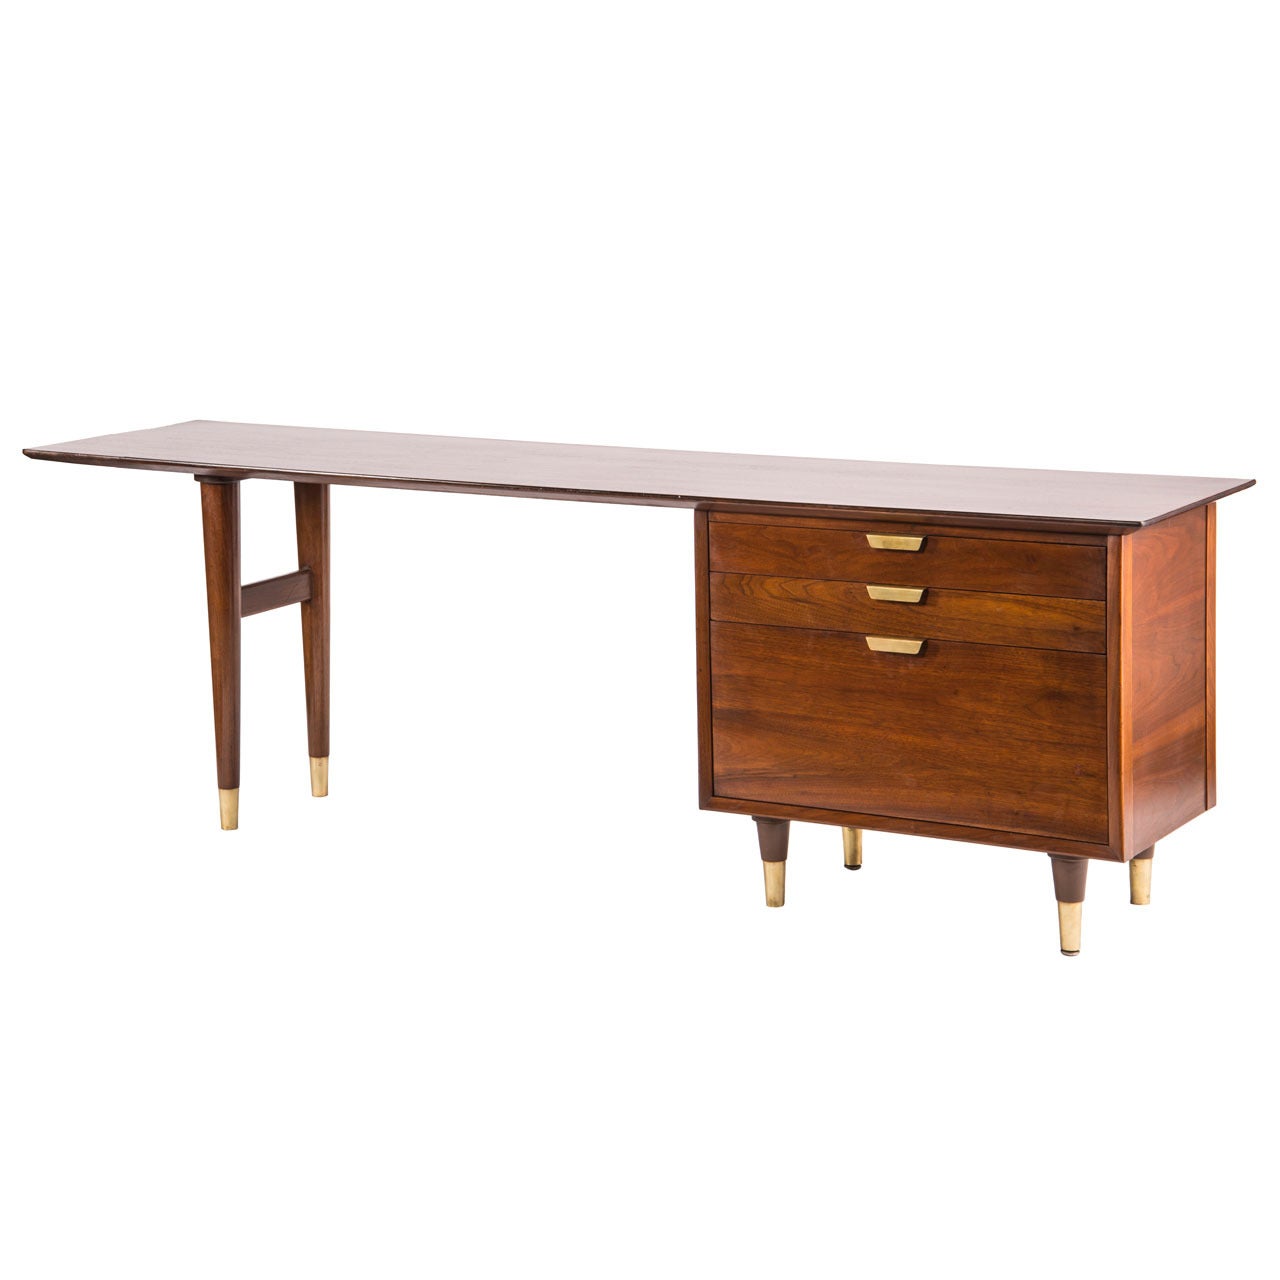 The Standard Furniture Co. Canted Desk